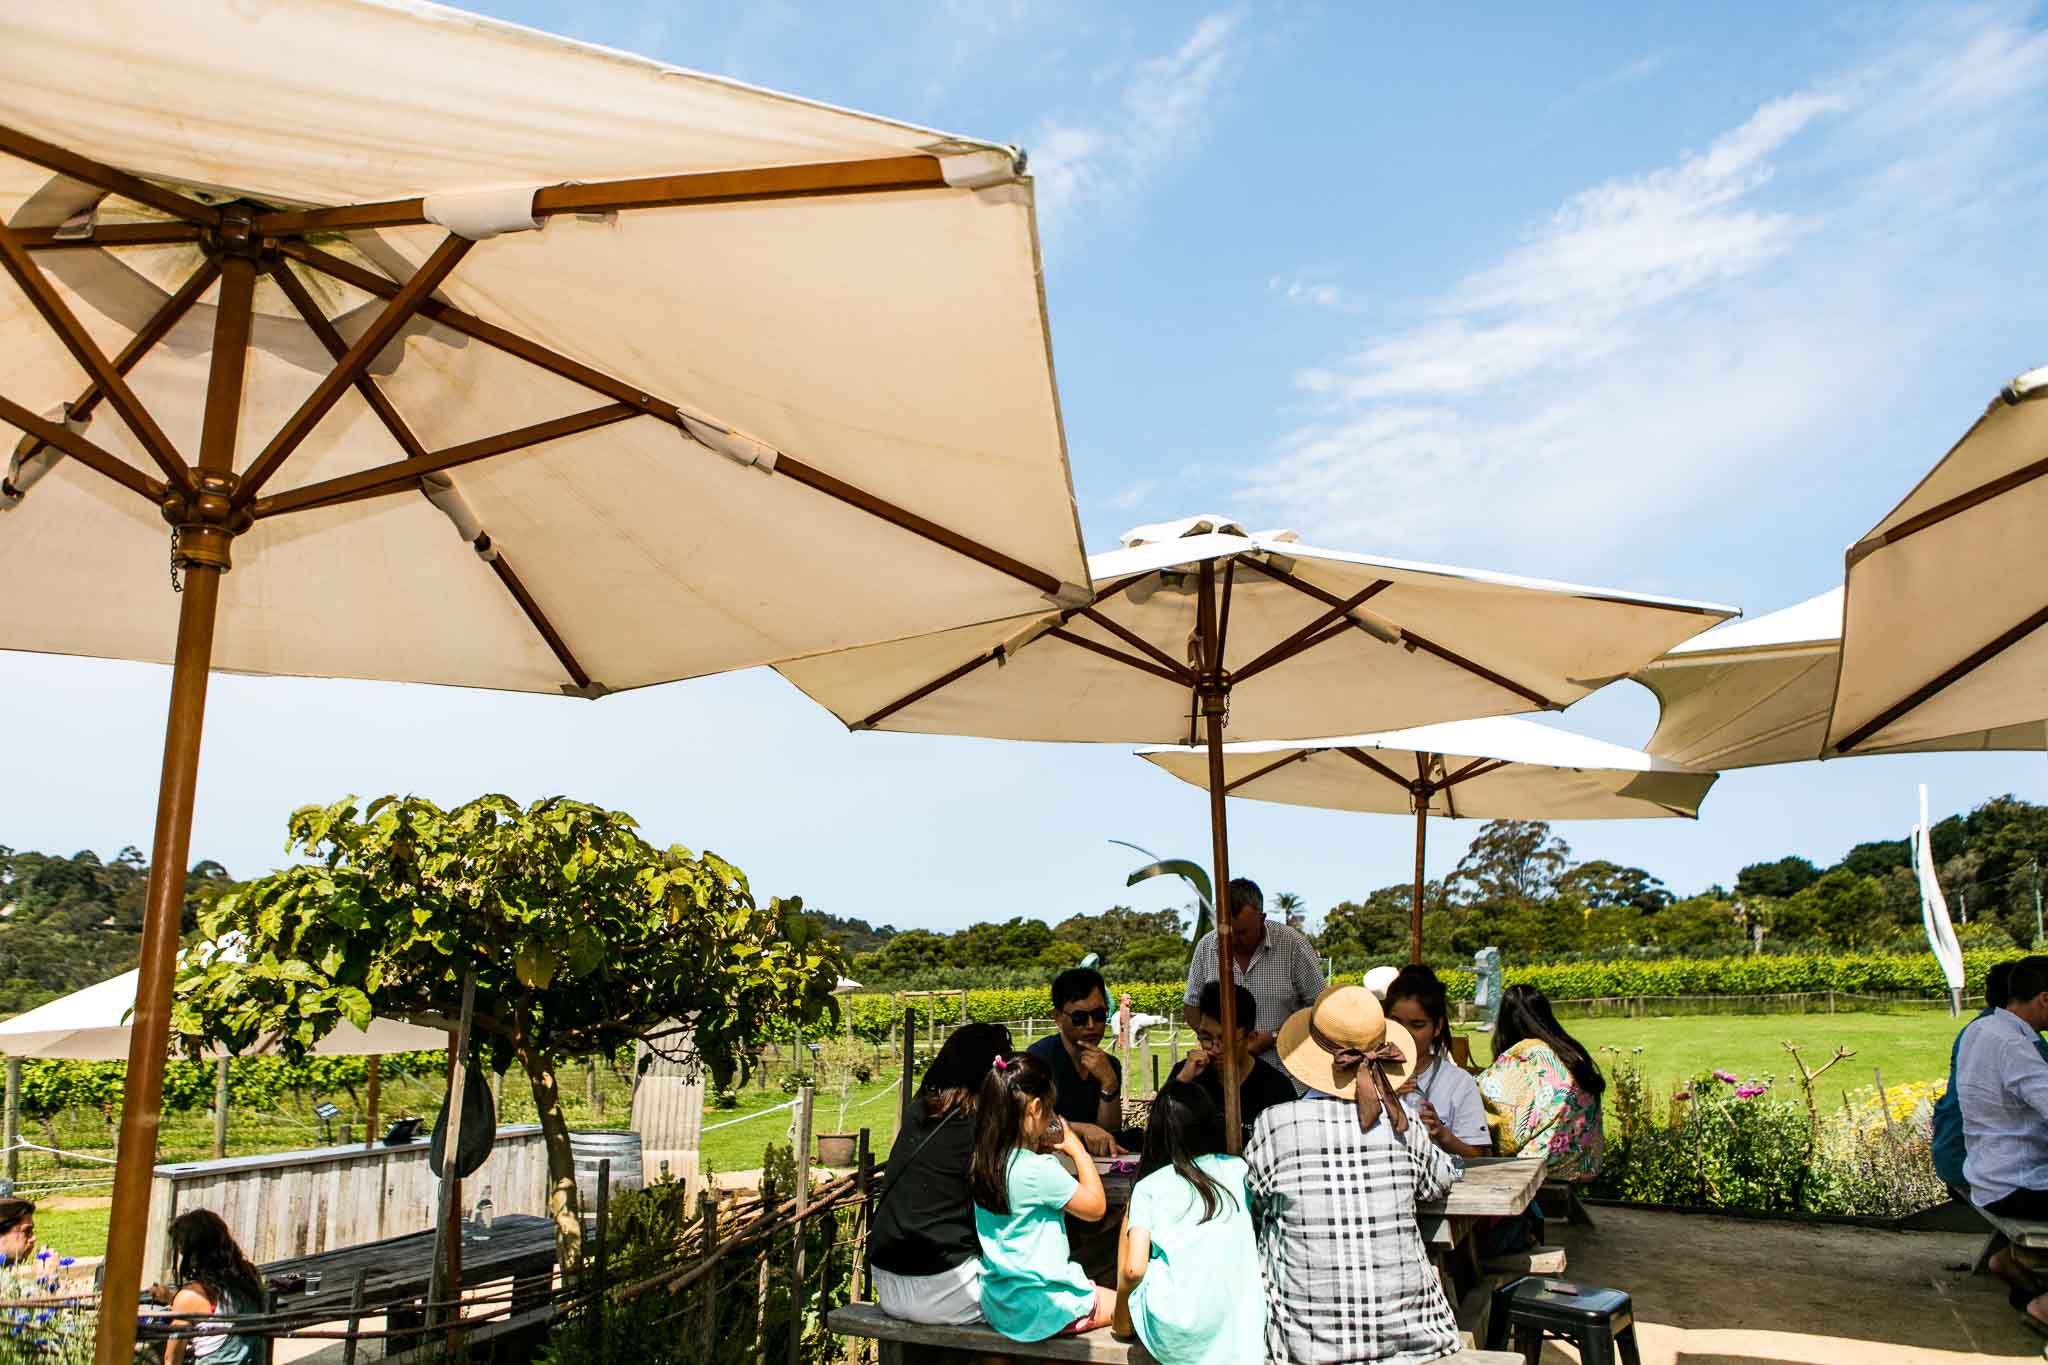 Large sun umbrellas envelope tables of large groups of people at Montalto Winery, with vineyards peeking through the background.